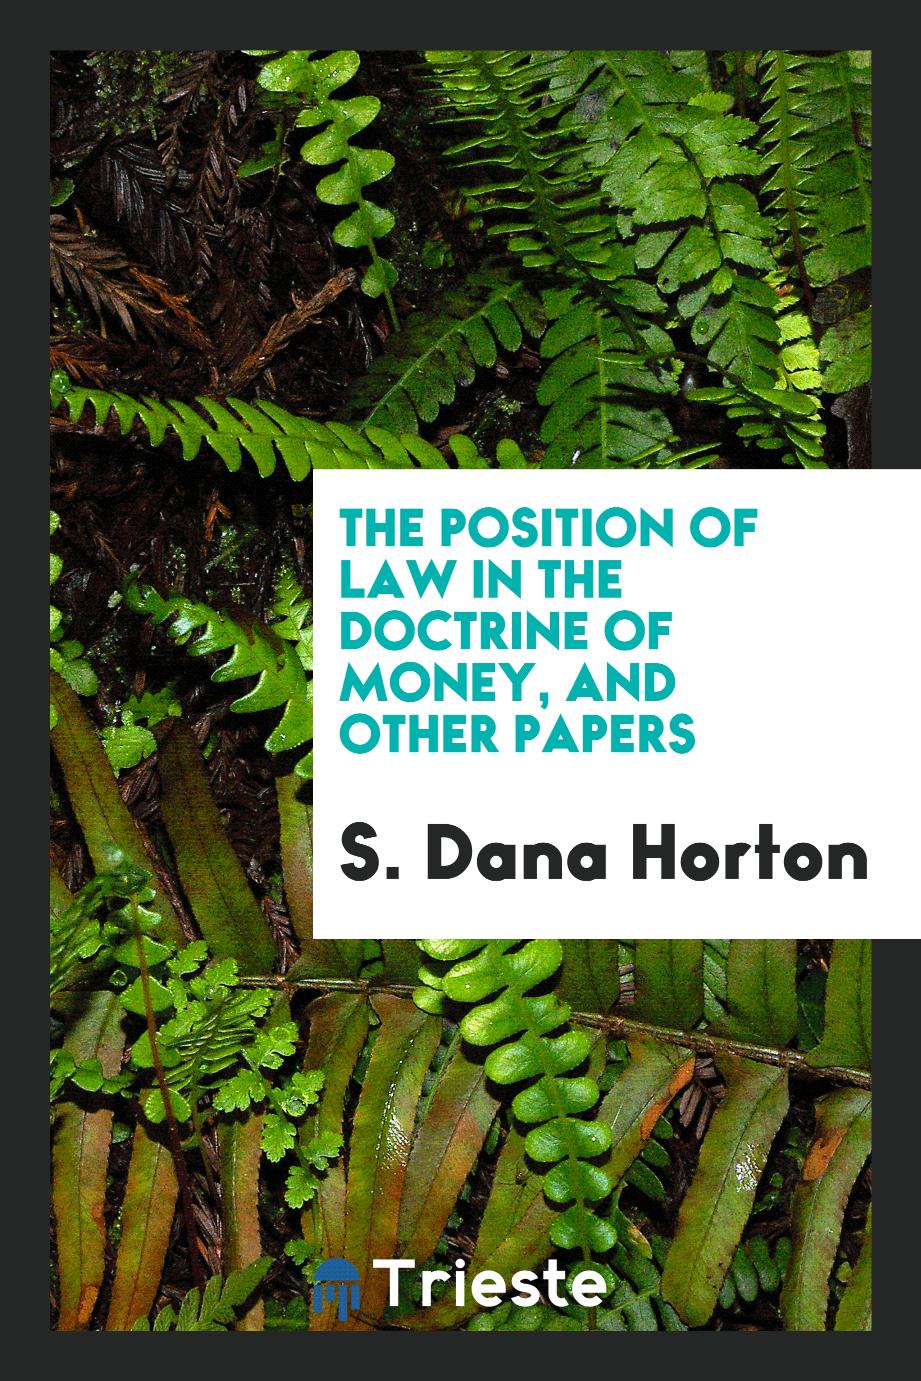 The position of law in the doctrine of money, and other papers